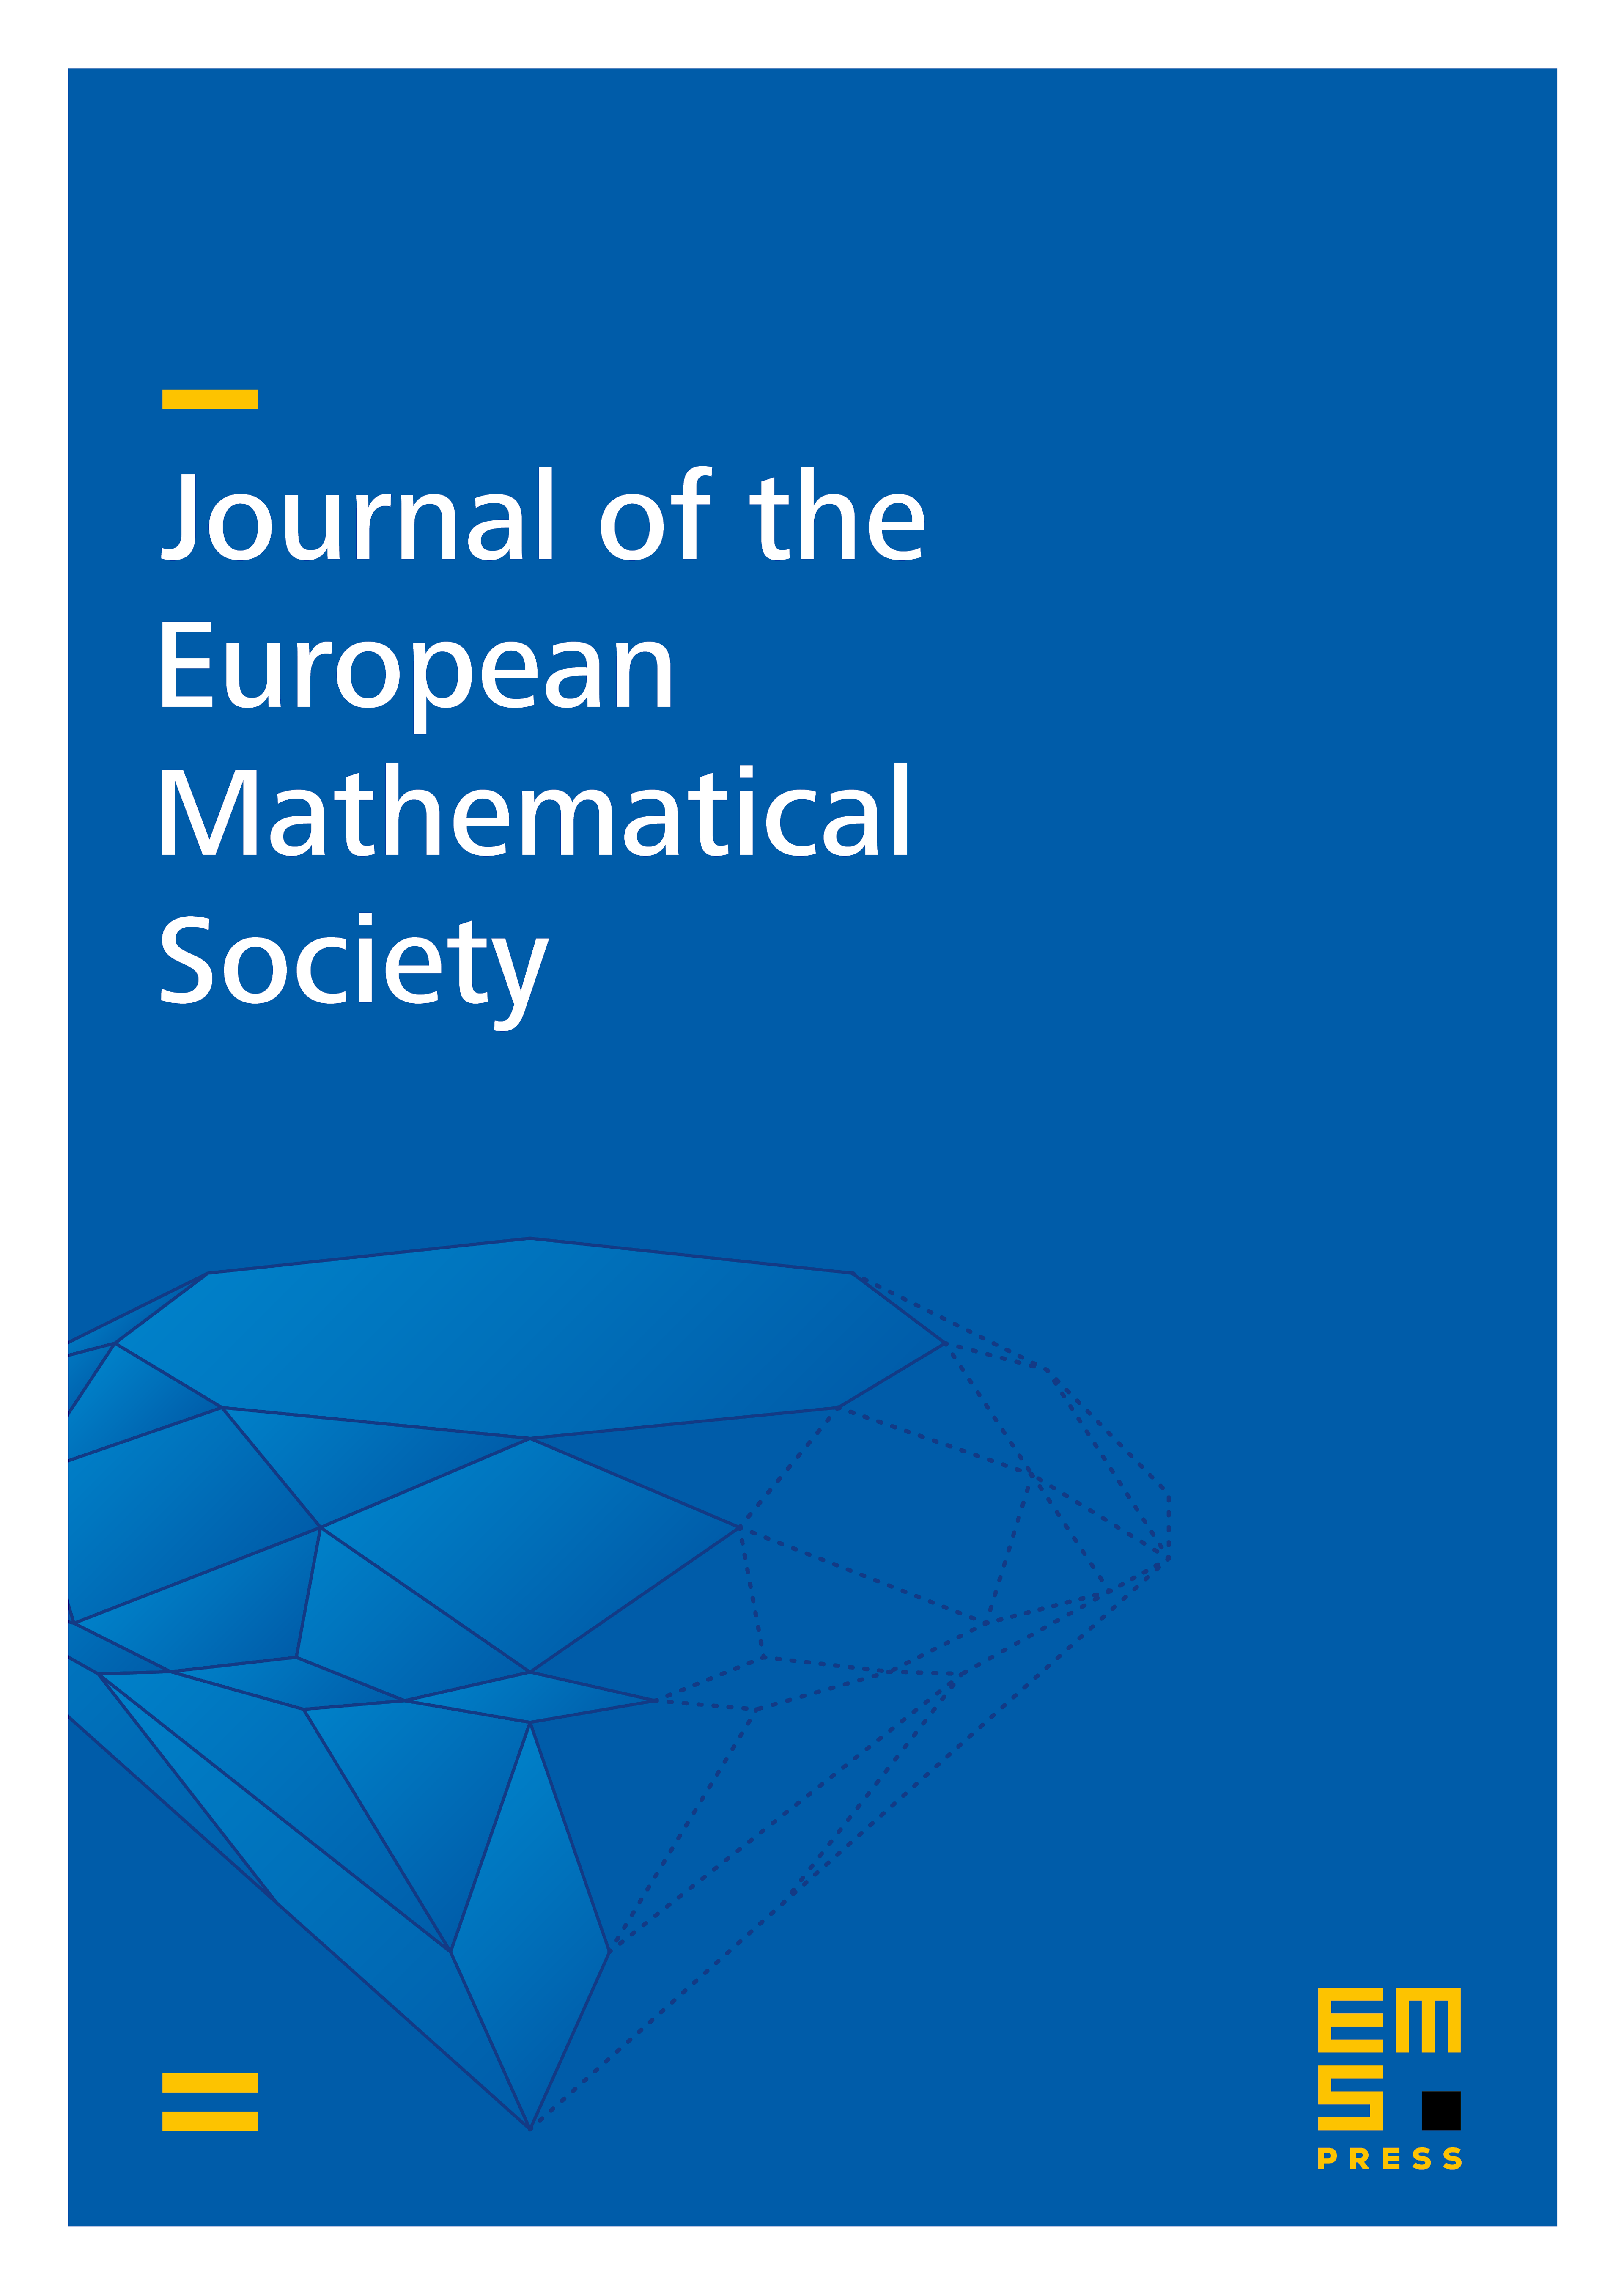 Monotonicity and phase transition for the VRJP and the ERRW cover